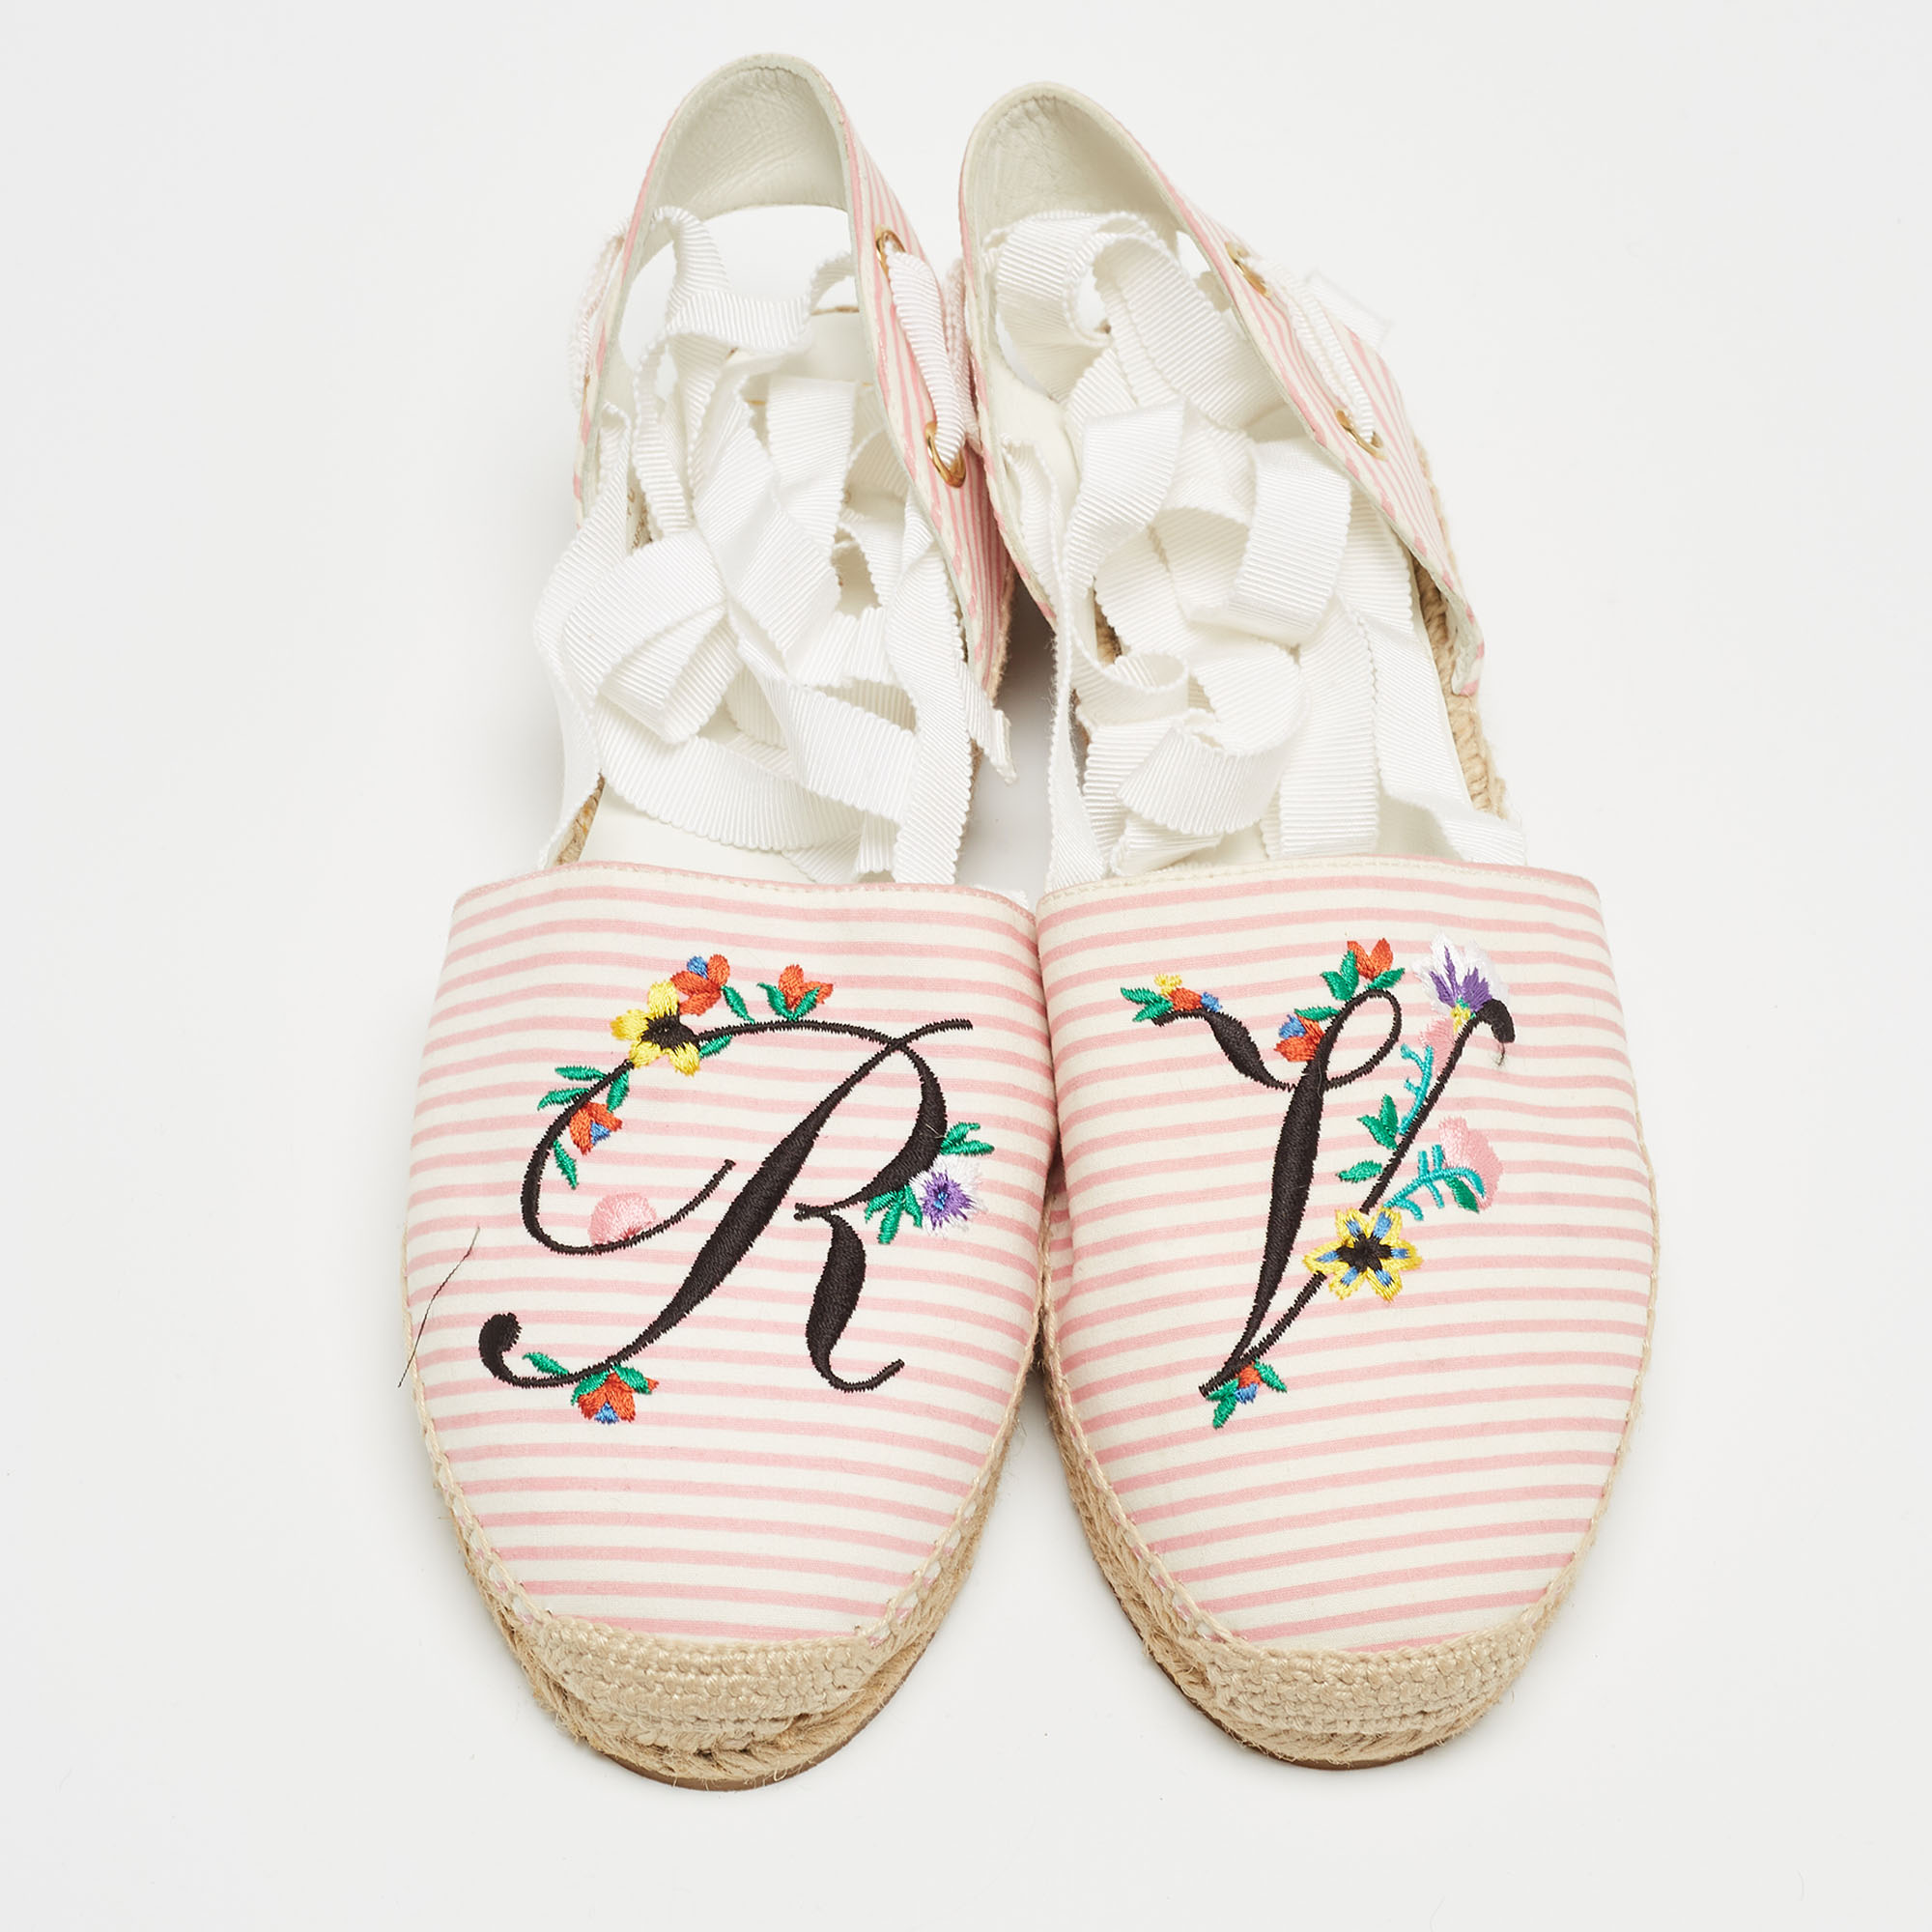 Roger Vivier Pink/White Striped Fabric Floral Embroidered Ankle Tie Espadrille Flats Size 40